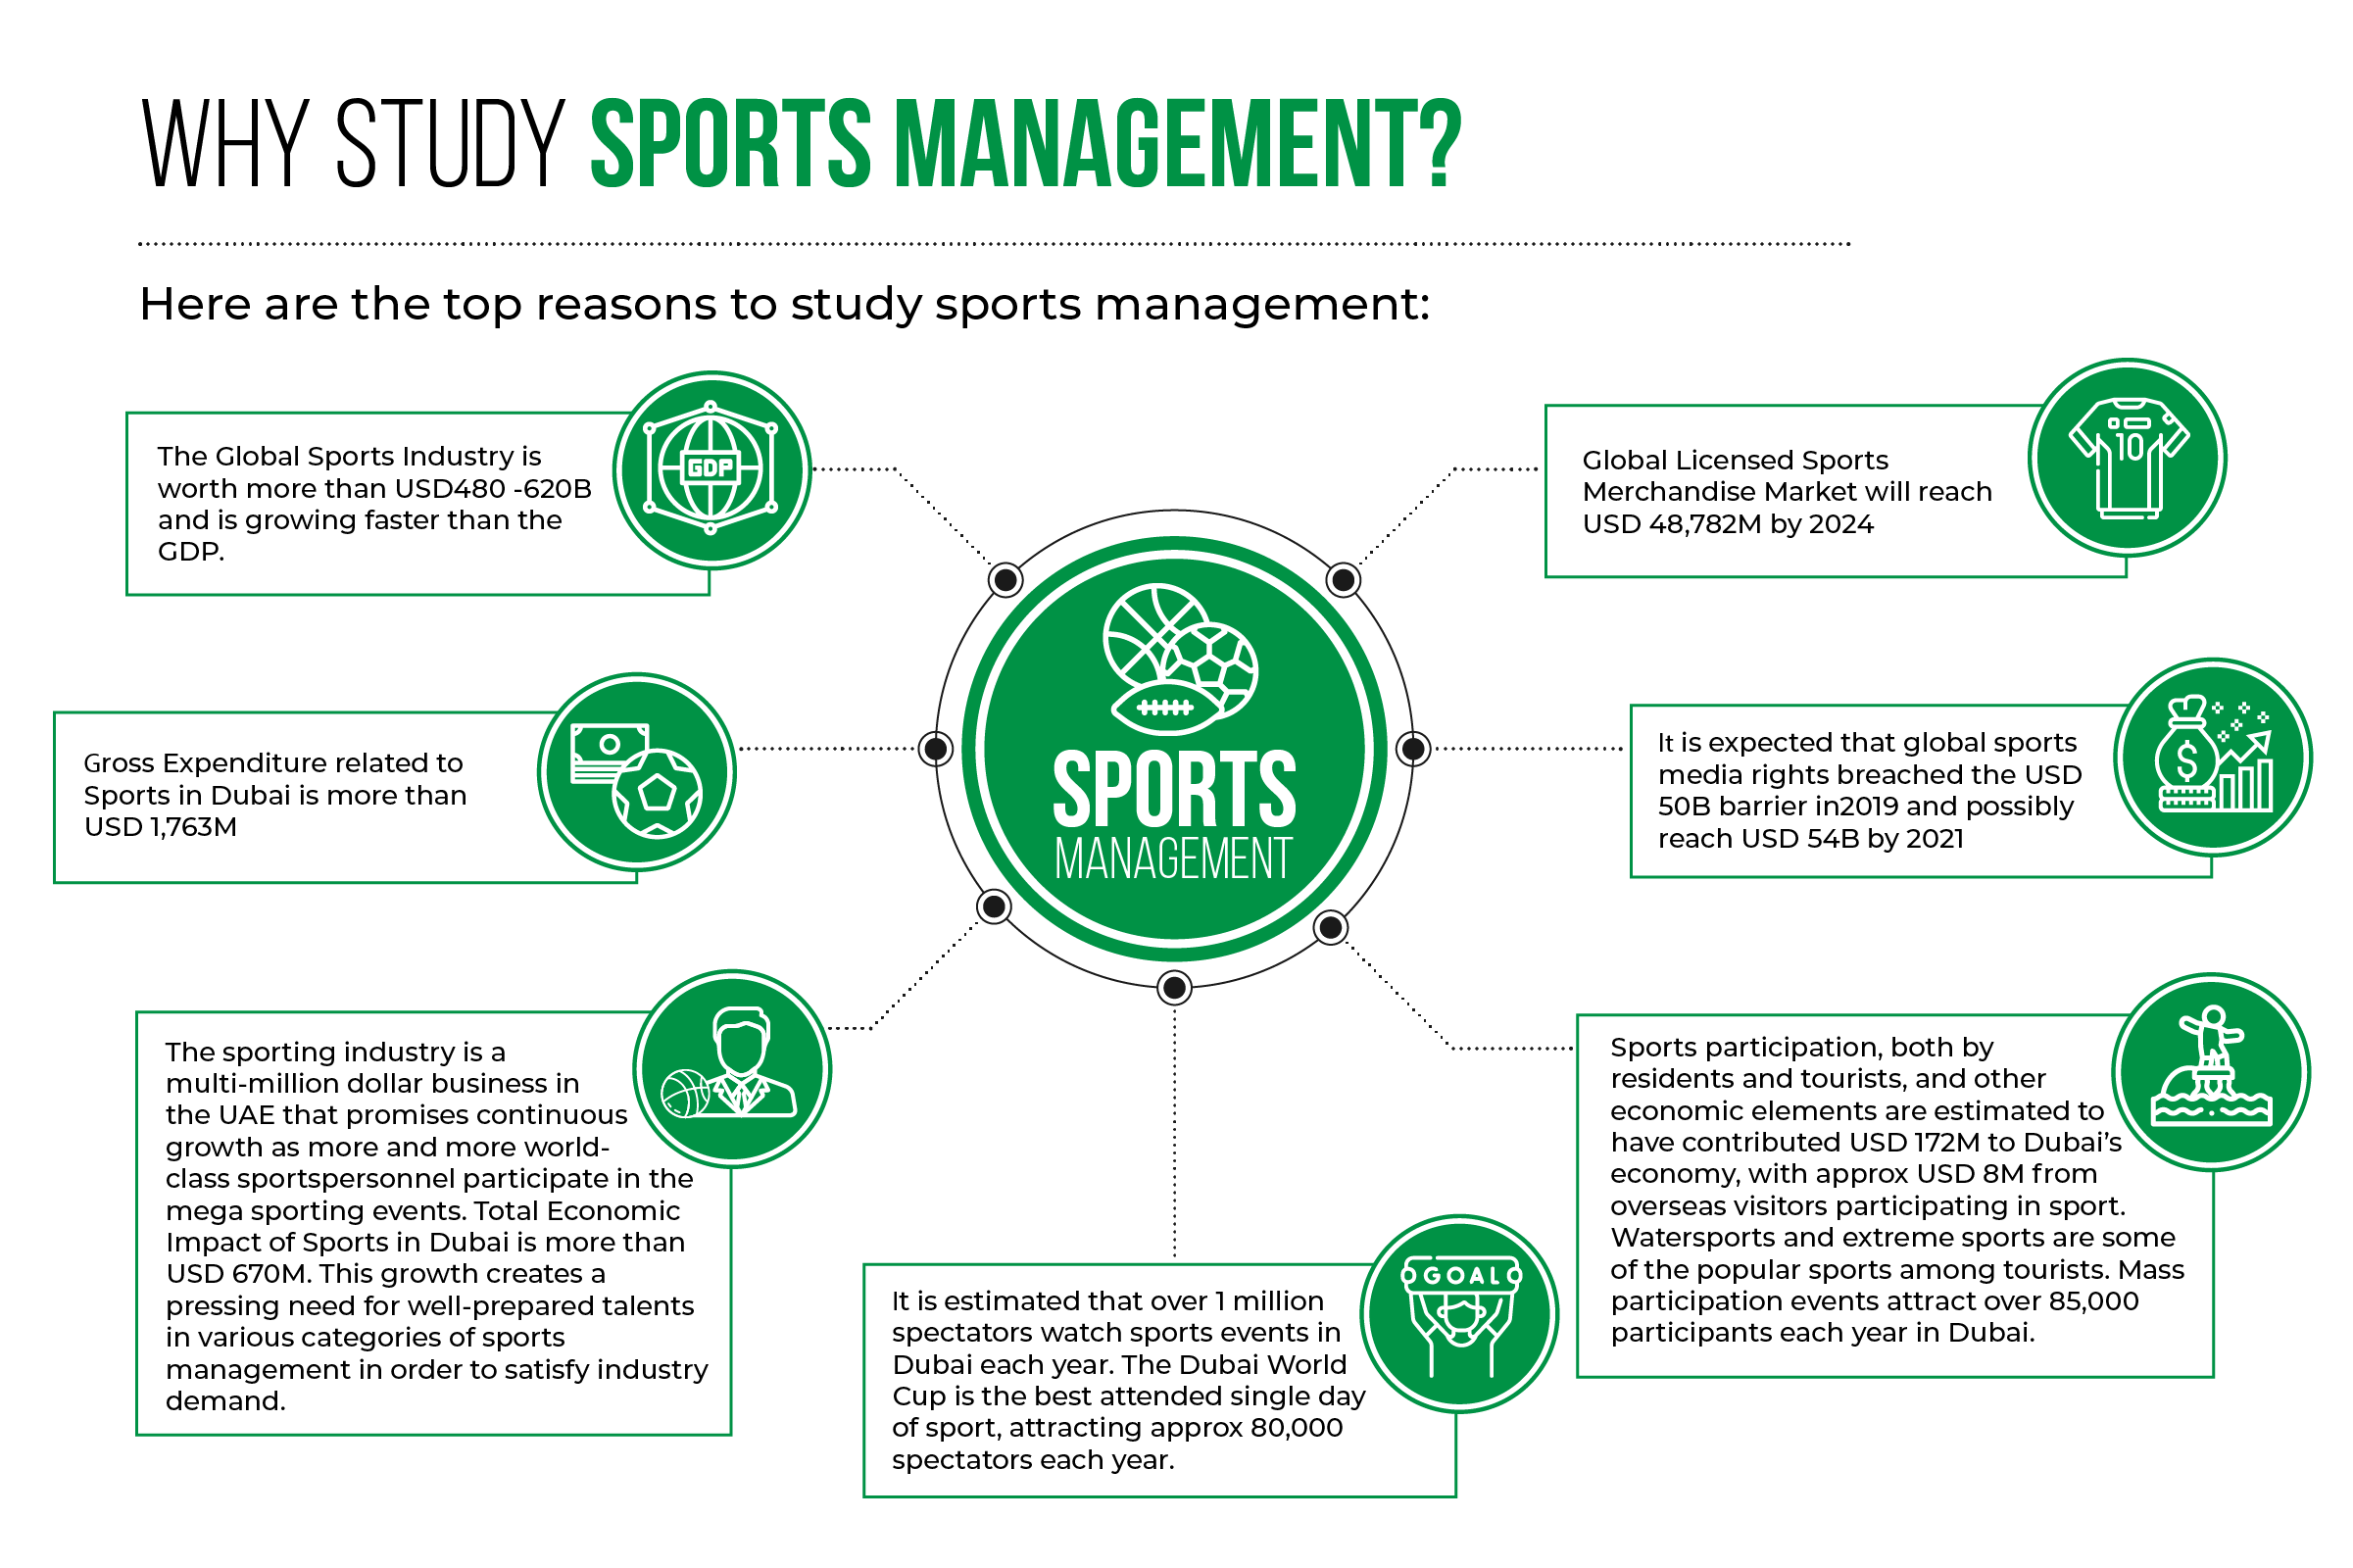 About Sports Management Industry